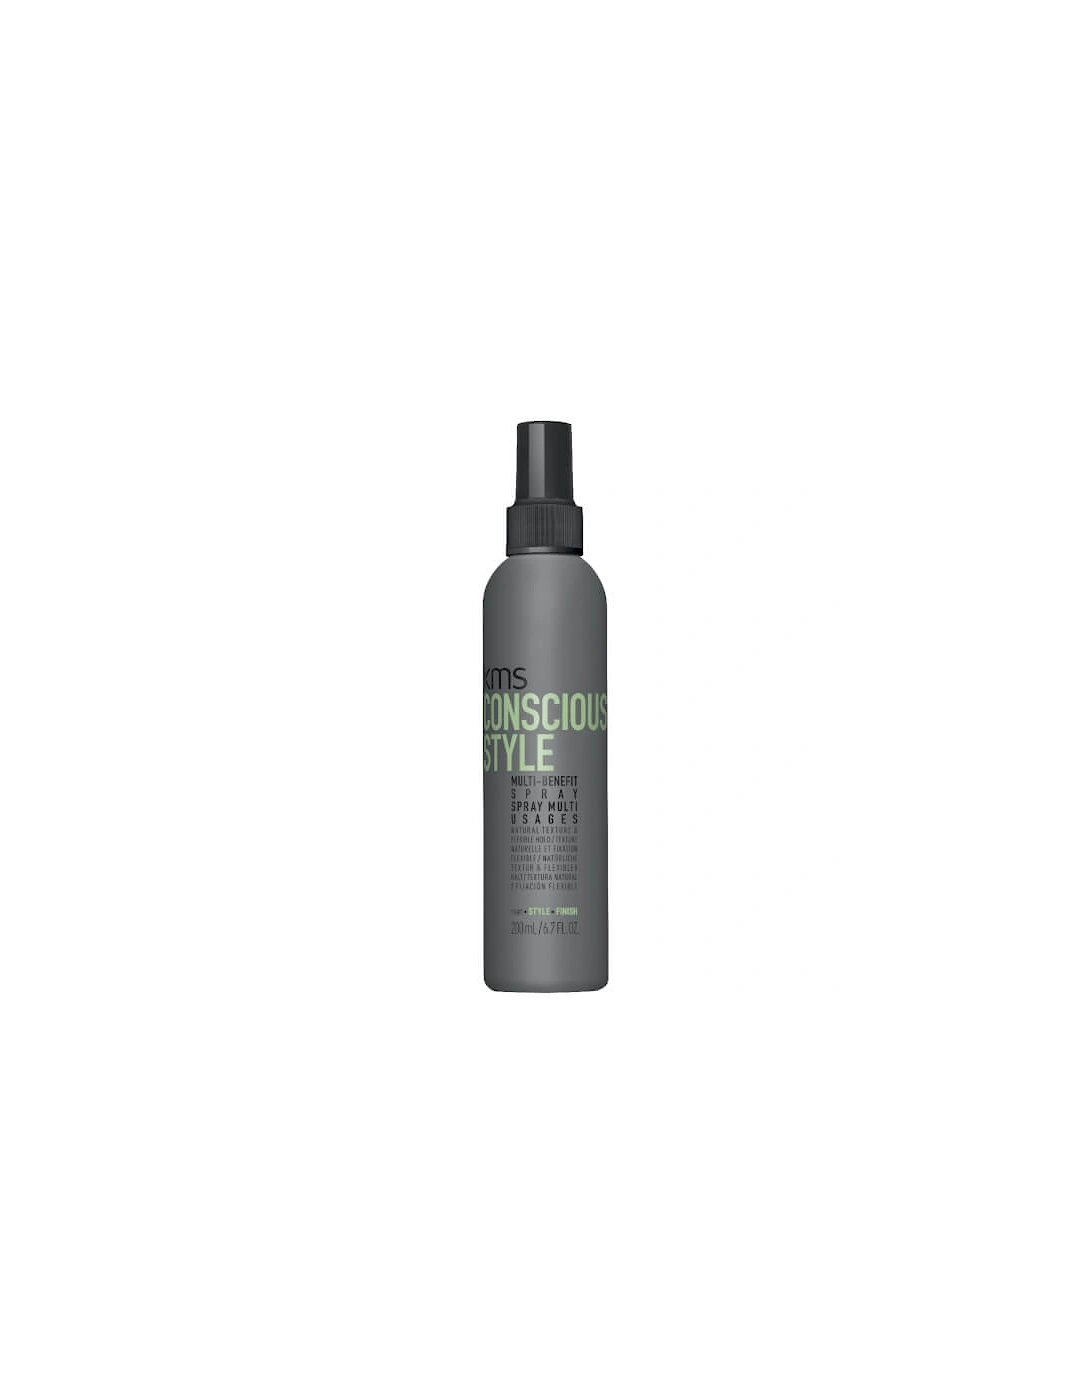 Conscious Style Multi-Benefit Spray 200ml - KMS, 2 of 1